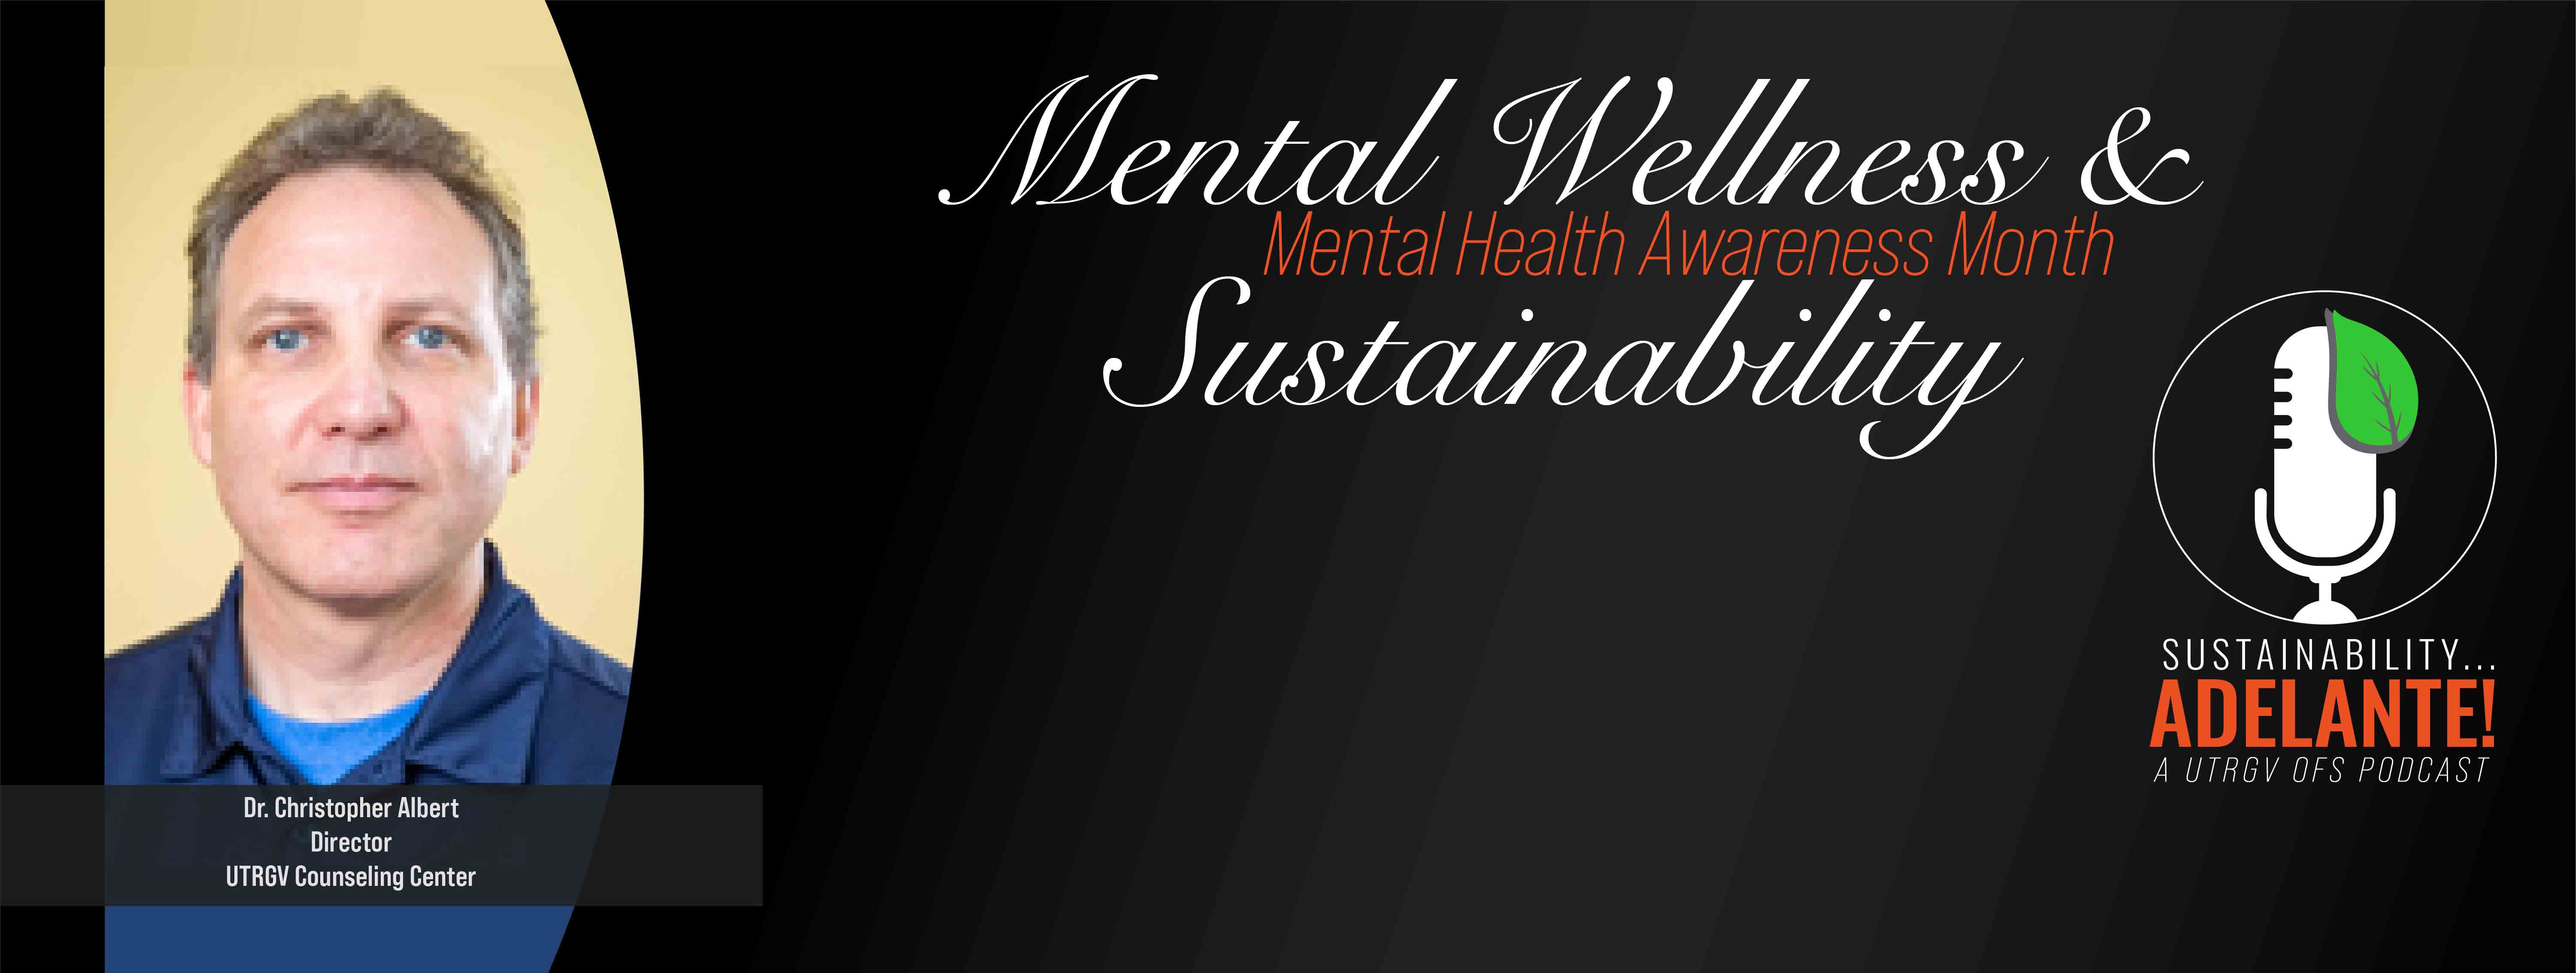 Mental Wellness and Mental Health Awareness Month Sustainability Podcast with Dr. Christopher Albert